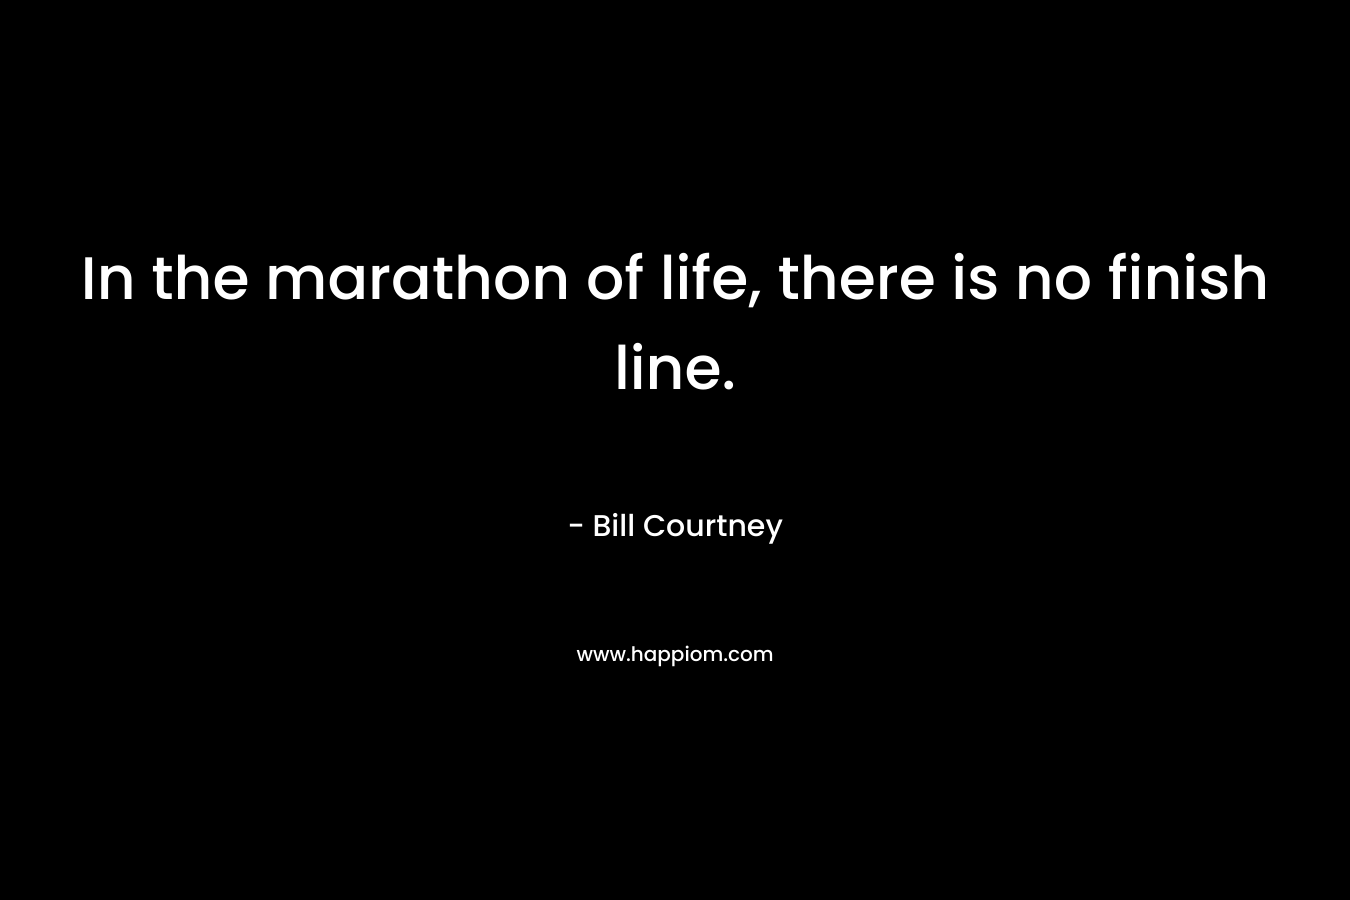 In the marathon of life, there is no finish line.